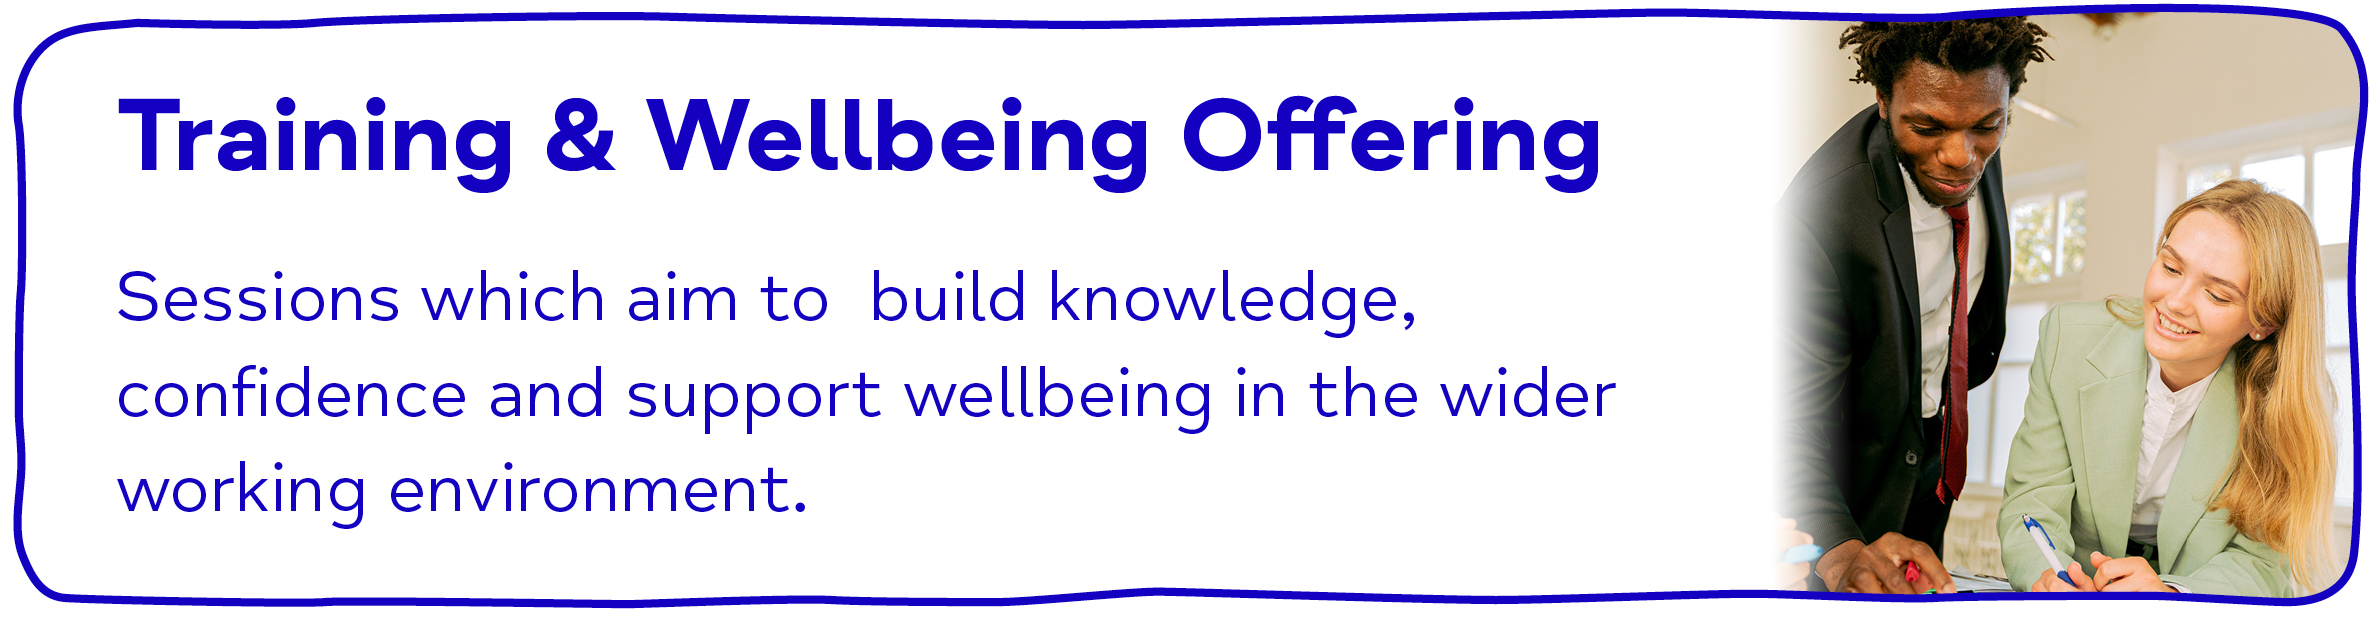 Training & Wellbeing Offering - Sessions which aim to build knowledge, confidence and support wellbeing in the wider working environment.